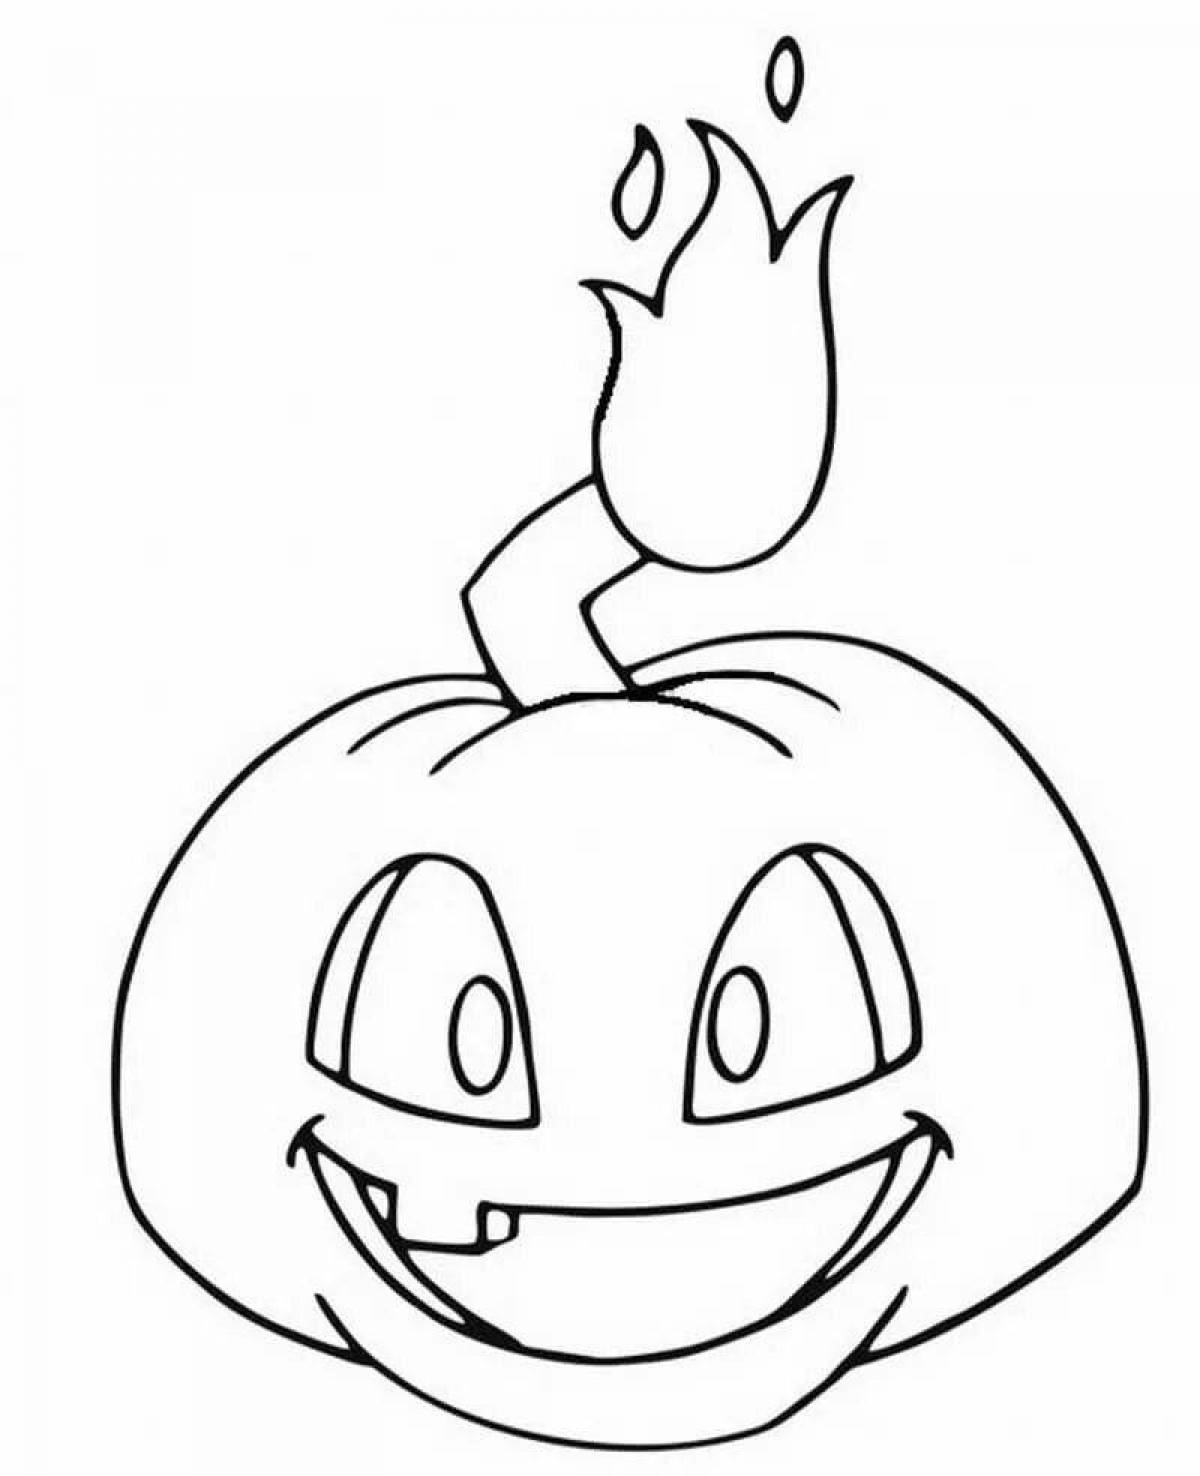 Animated pea shooter plants vs zombies coloring page